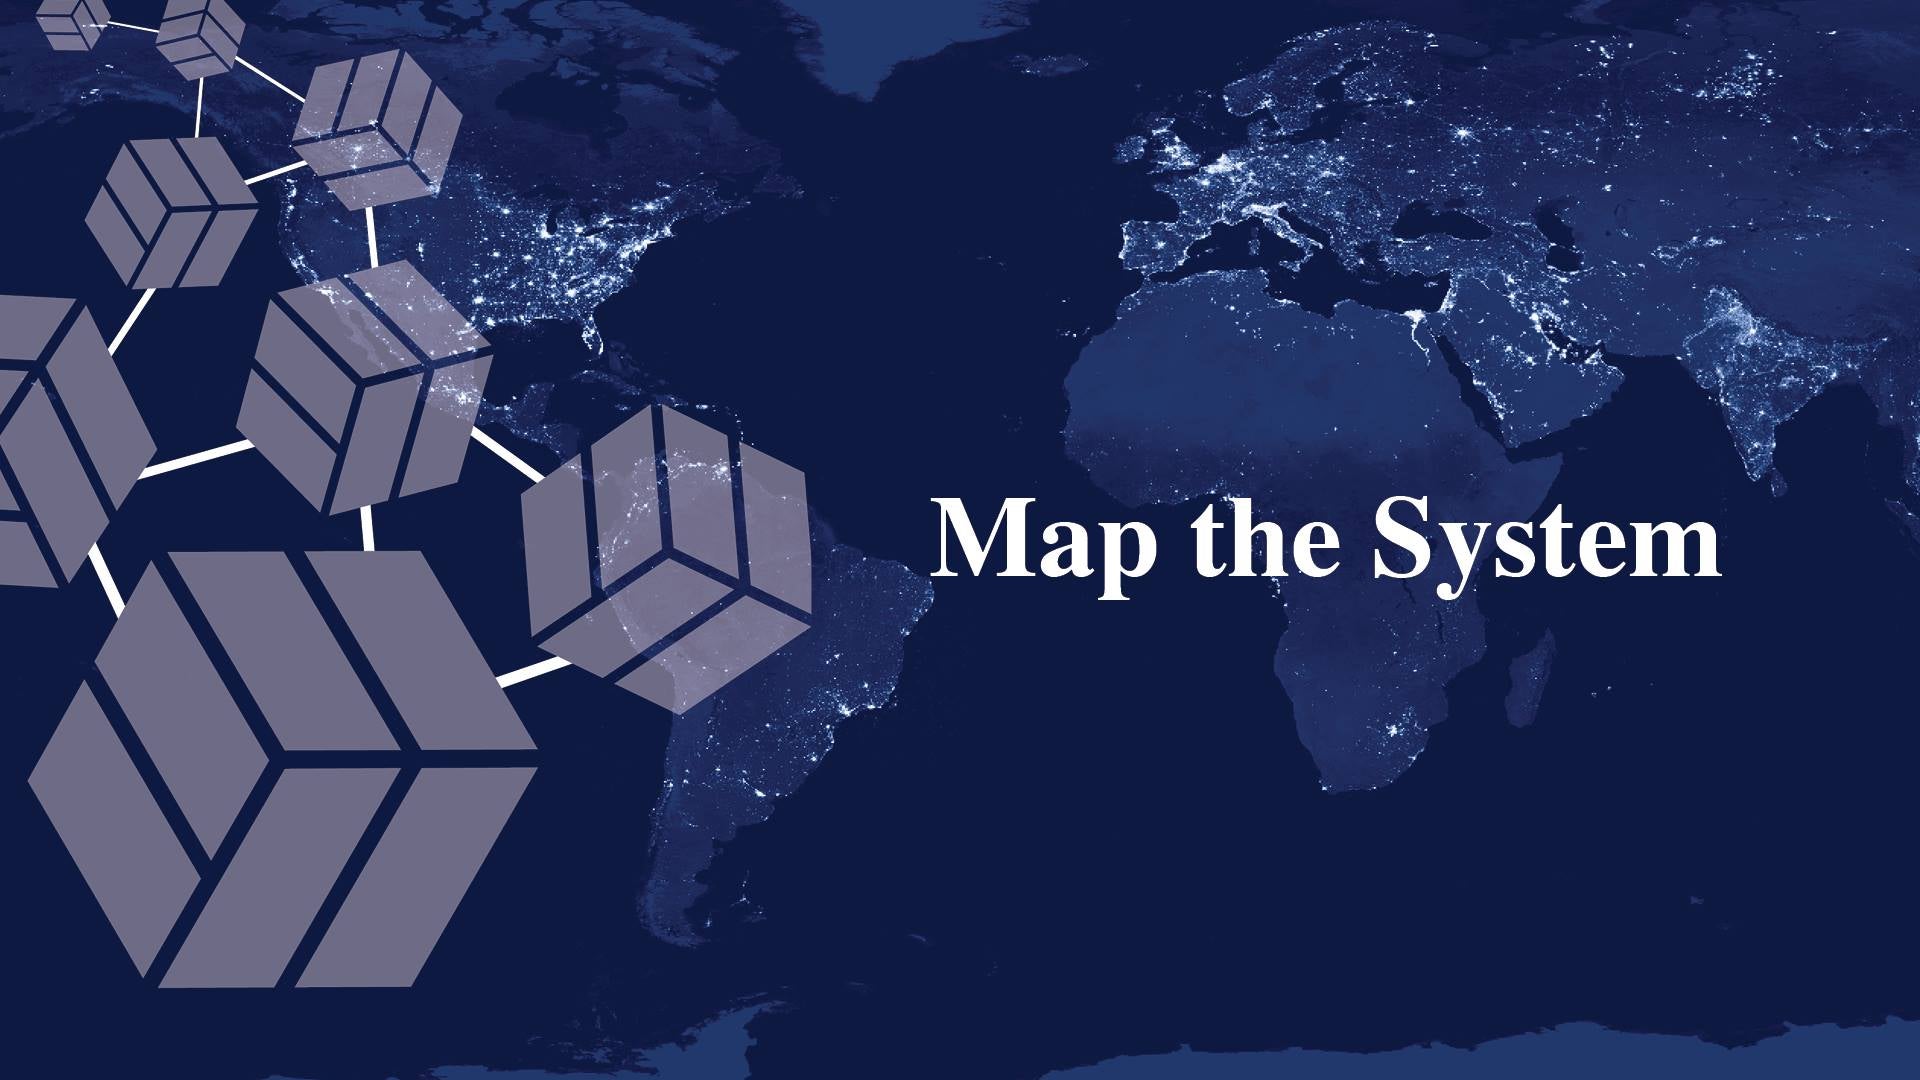 "Map the System" text on top of globe background